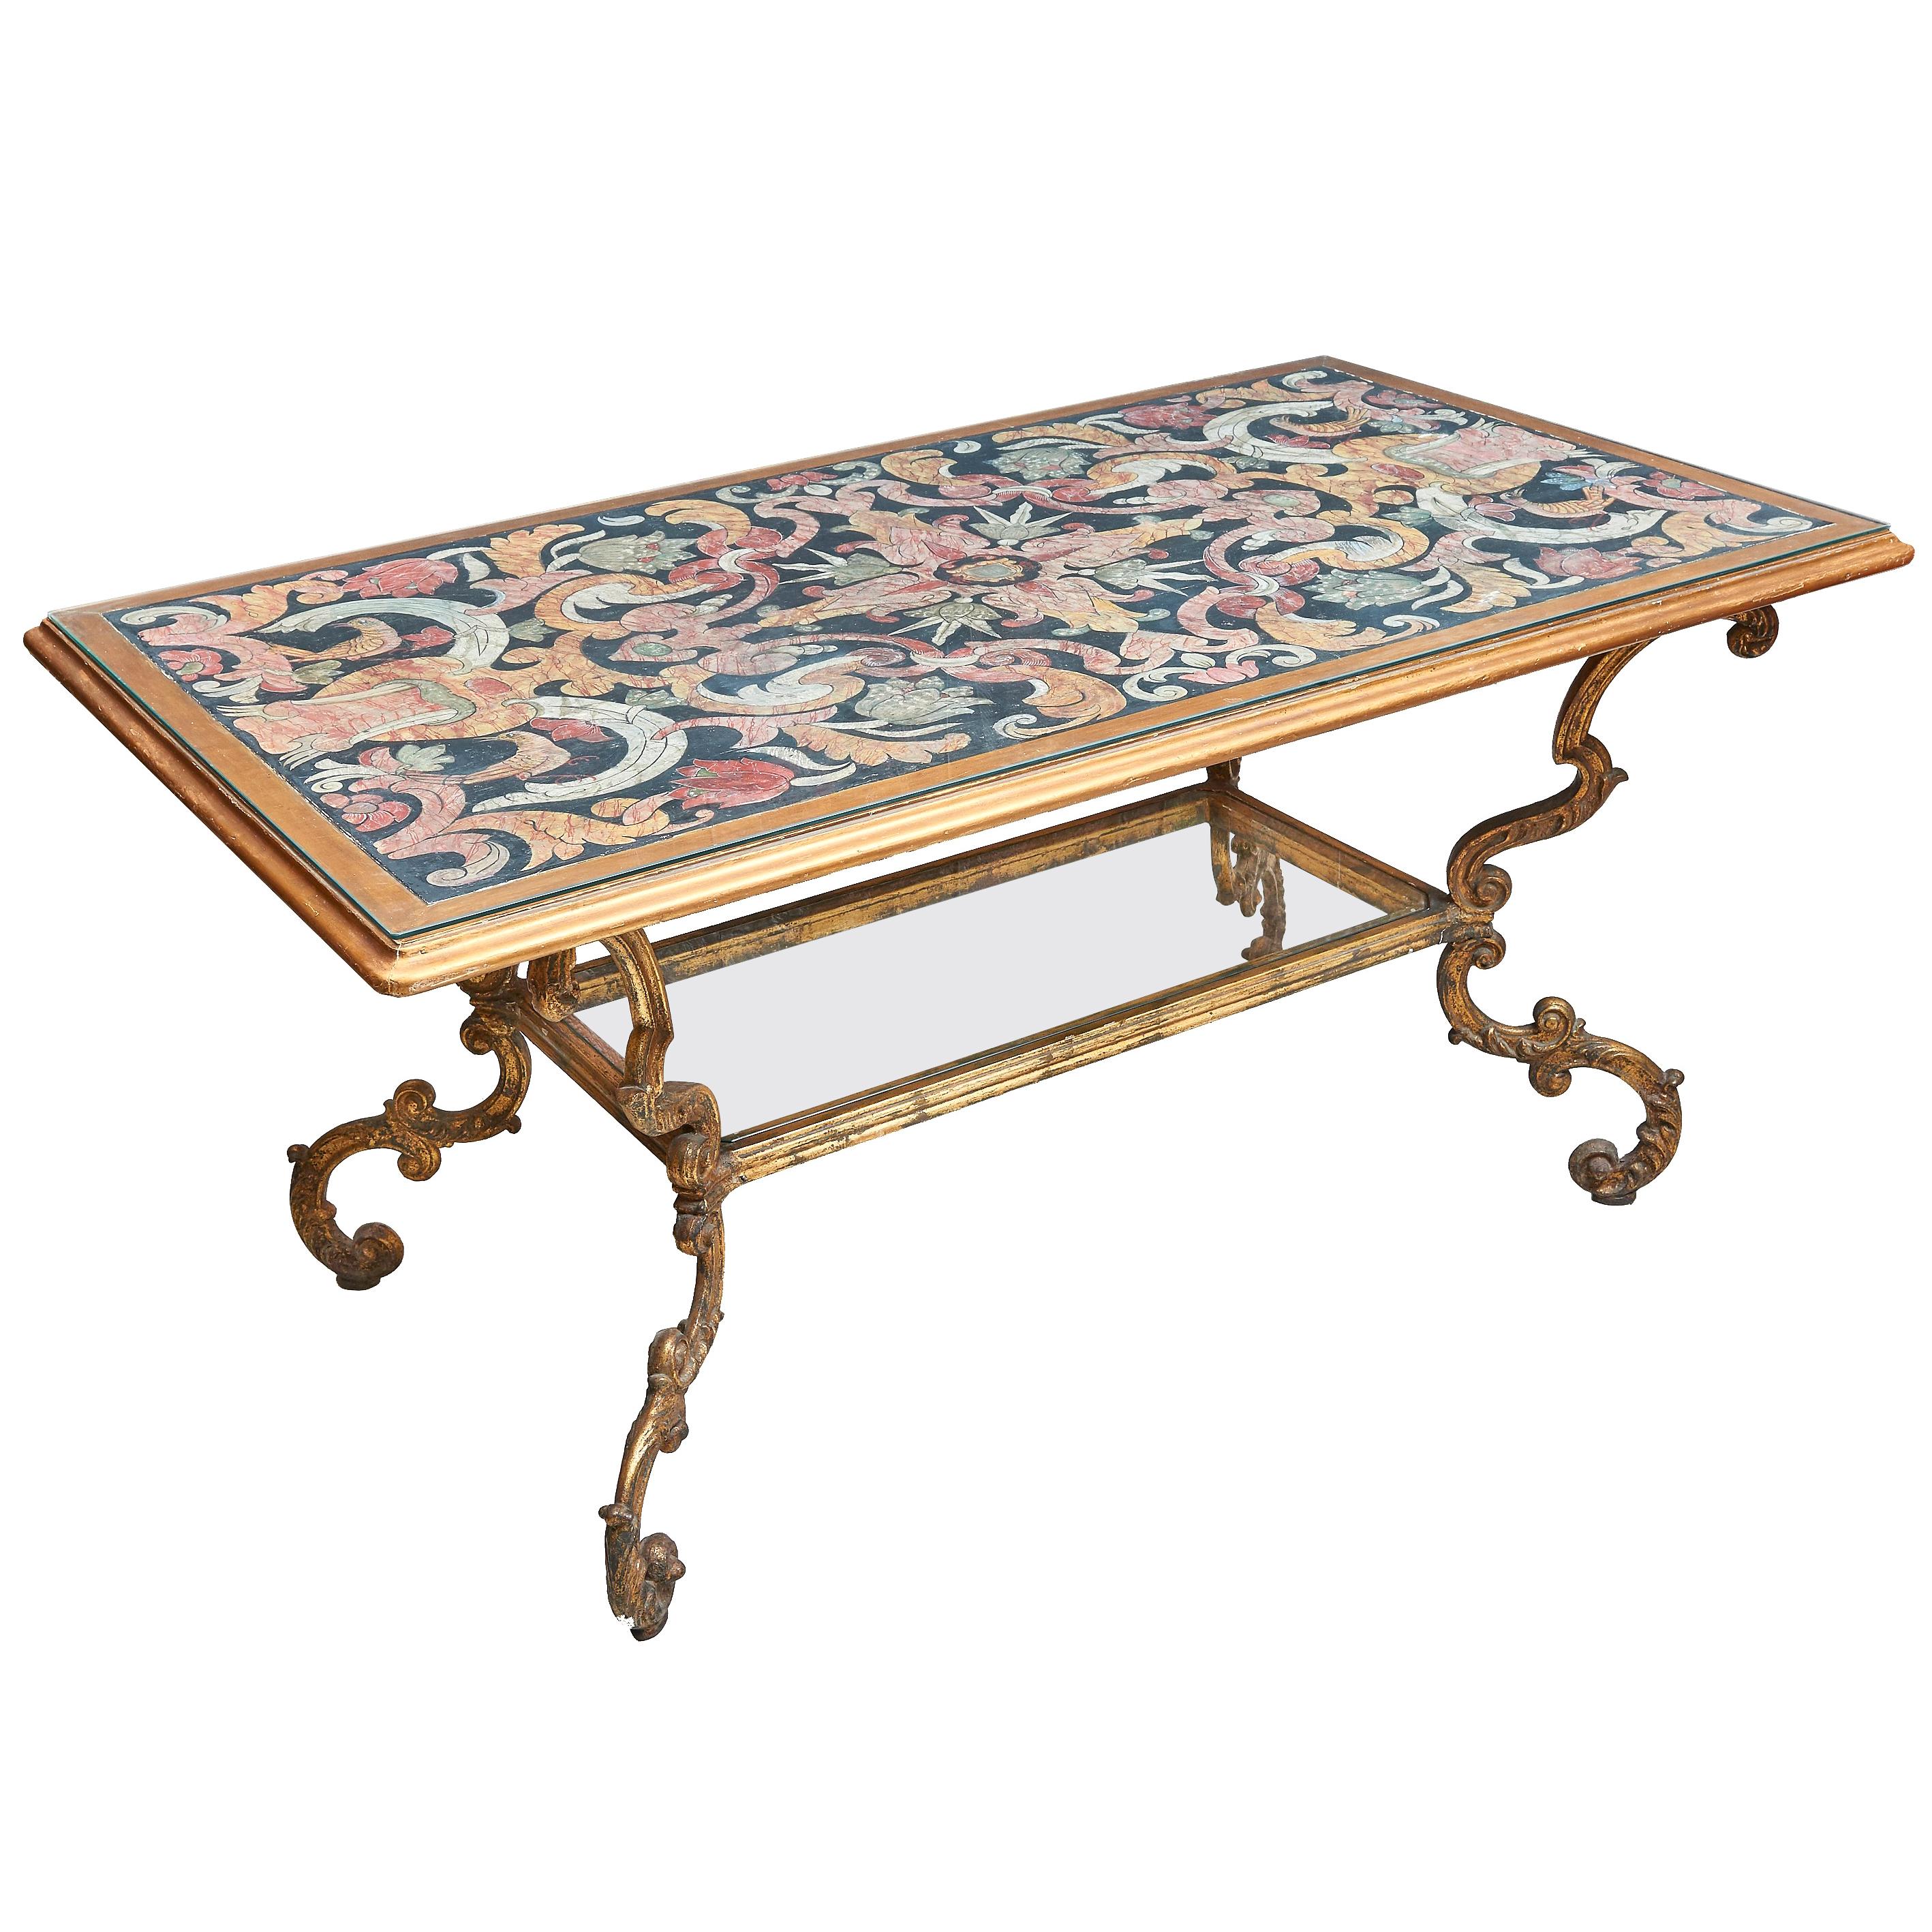 Italian Gilt-Iron Centre Table with Painted Imitation Scagliola Top, circa 1880 For Sale